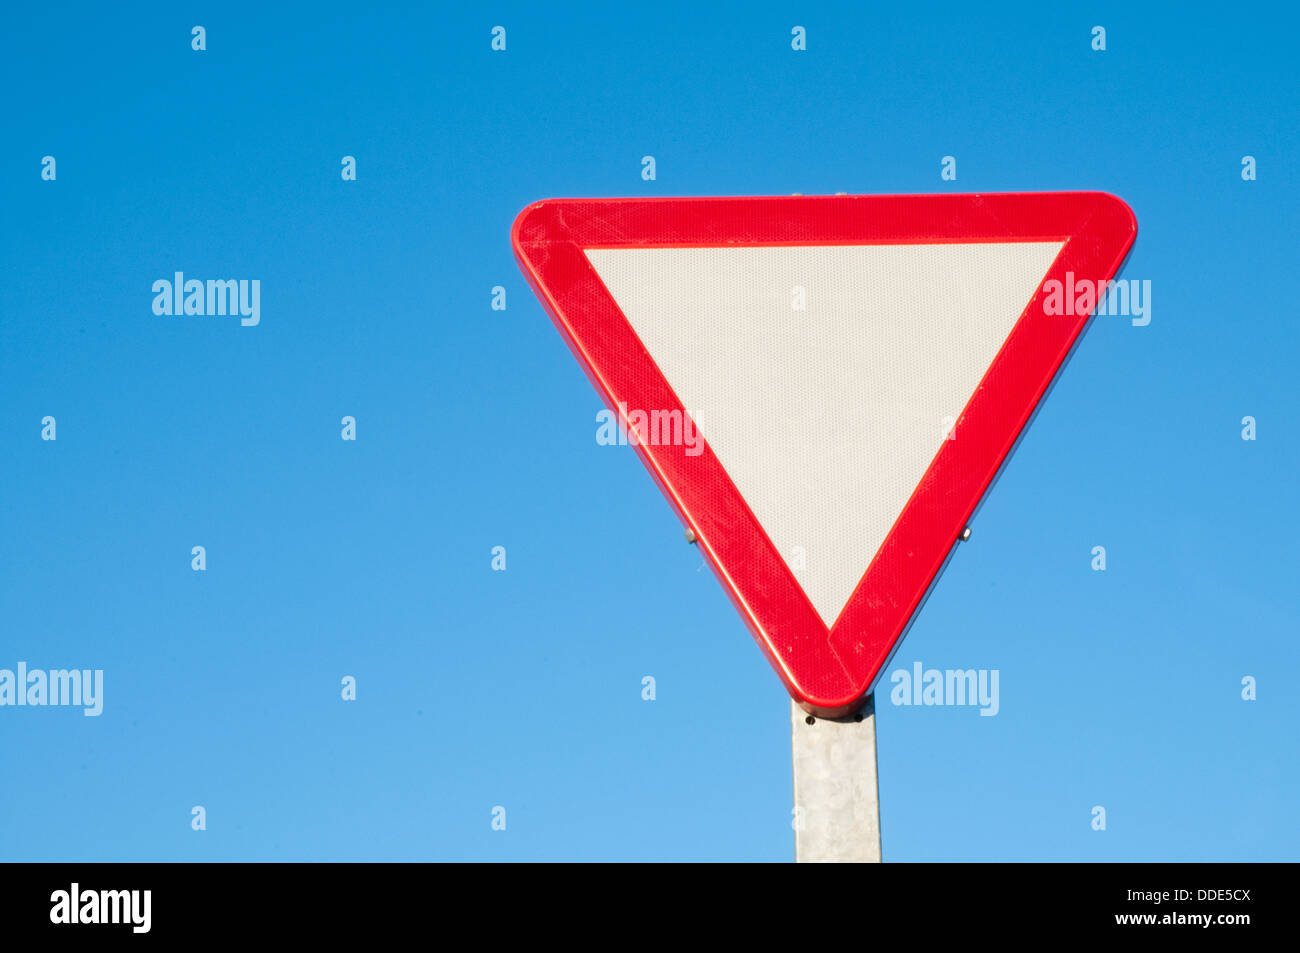 Keep way traffic sign against blue sky. Stock Photo